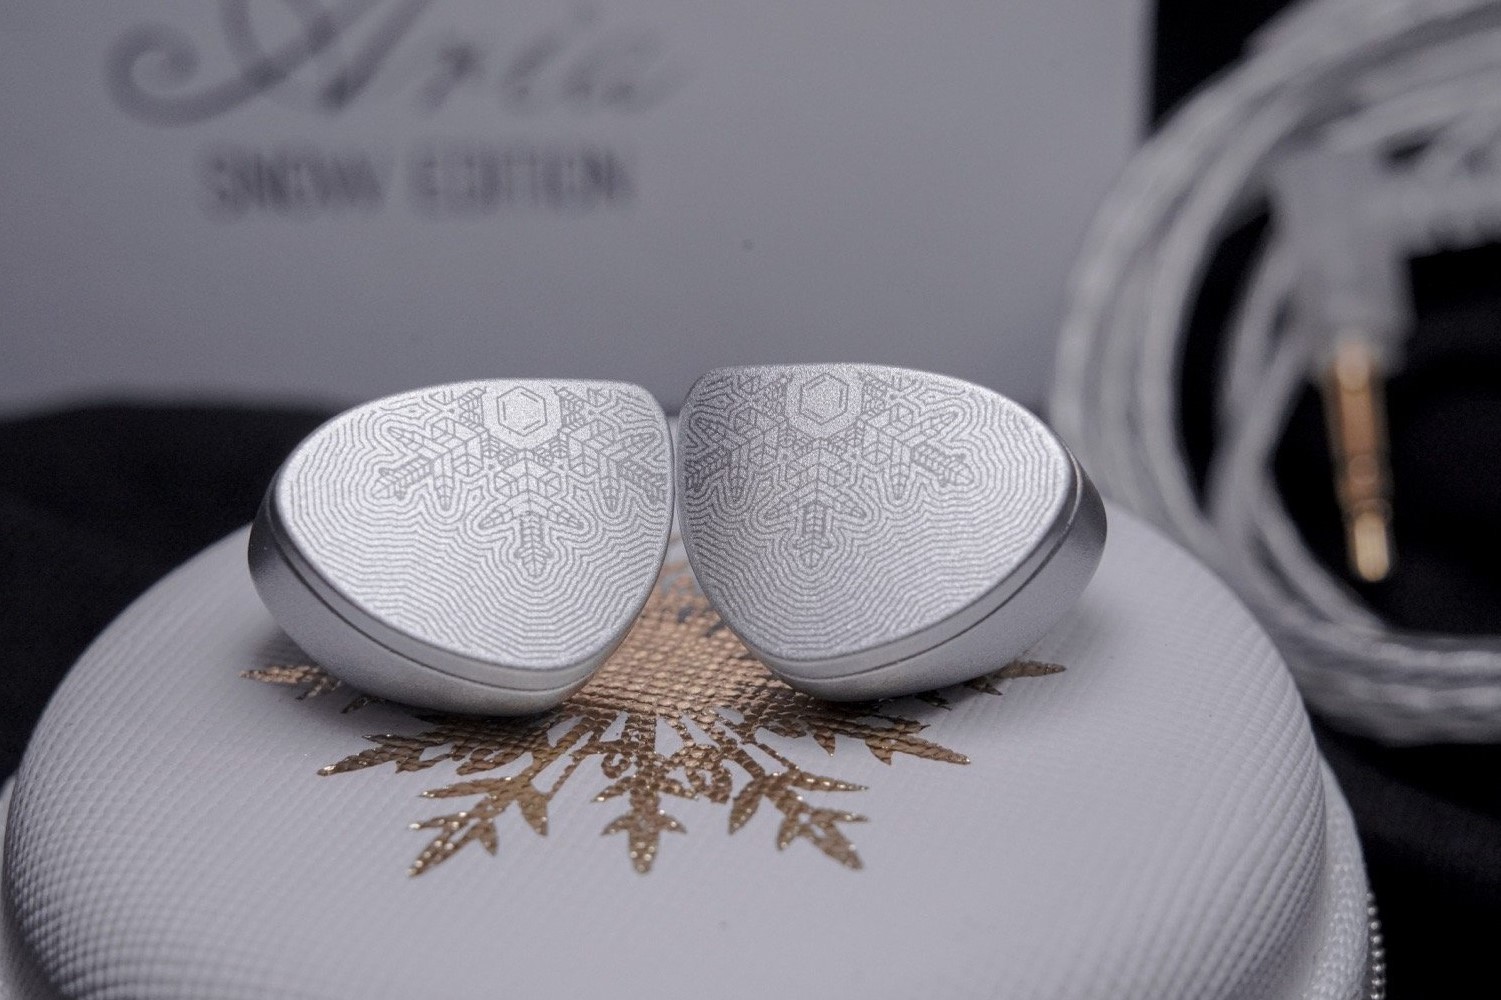 New Moondrop Aria Snow Edition With Diamond-Like Carbon Diaphragm Released